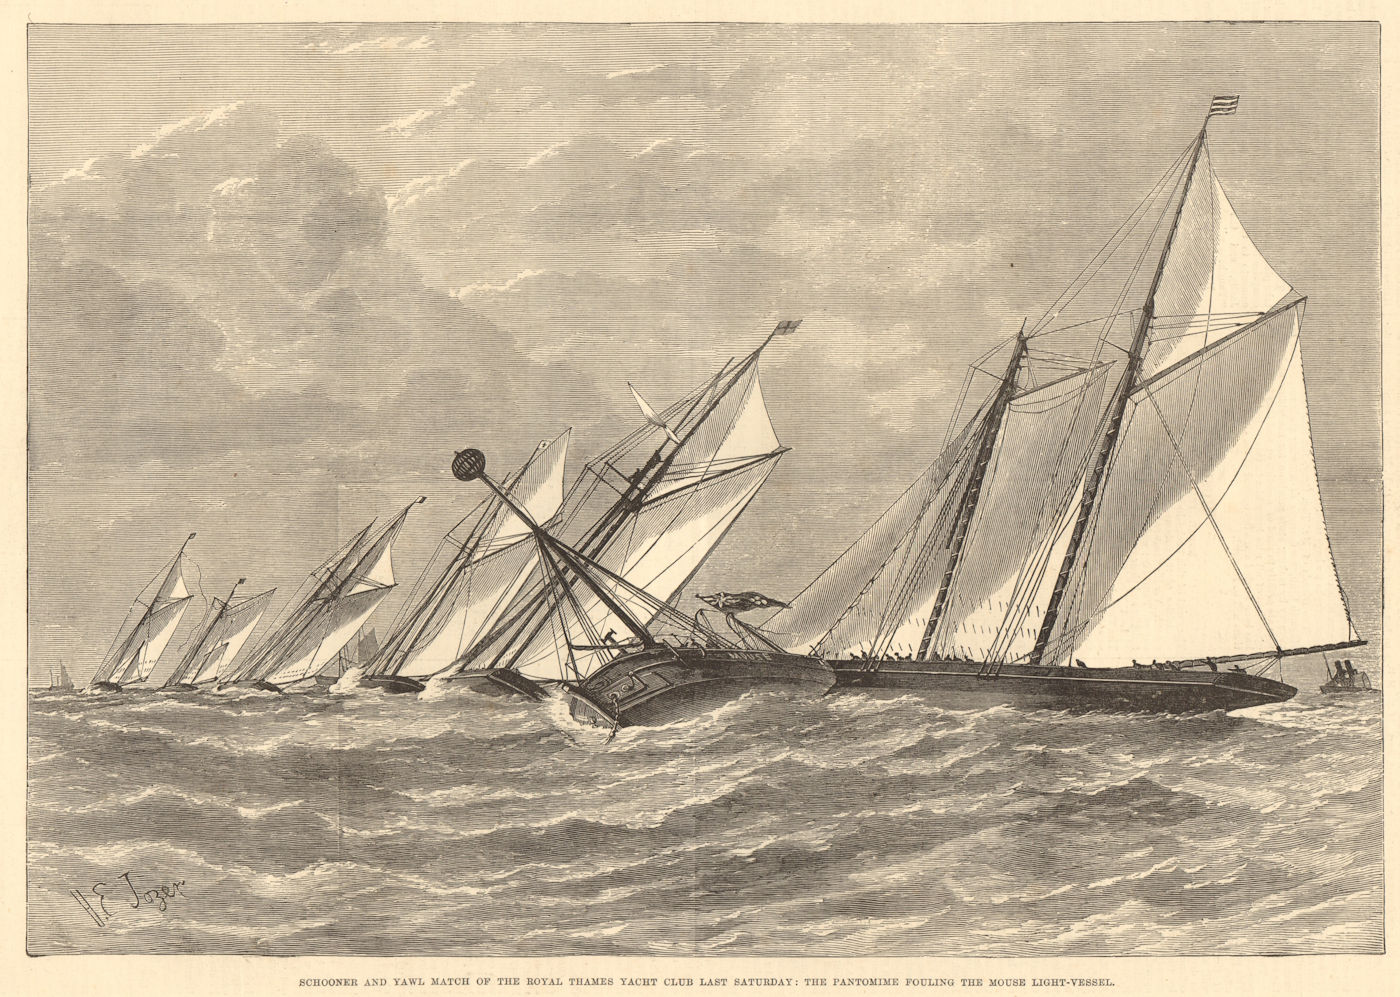 Associate Product Royal Thames Yacht Club schooner yawl match. Pantomime Mouse lightship 1876